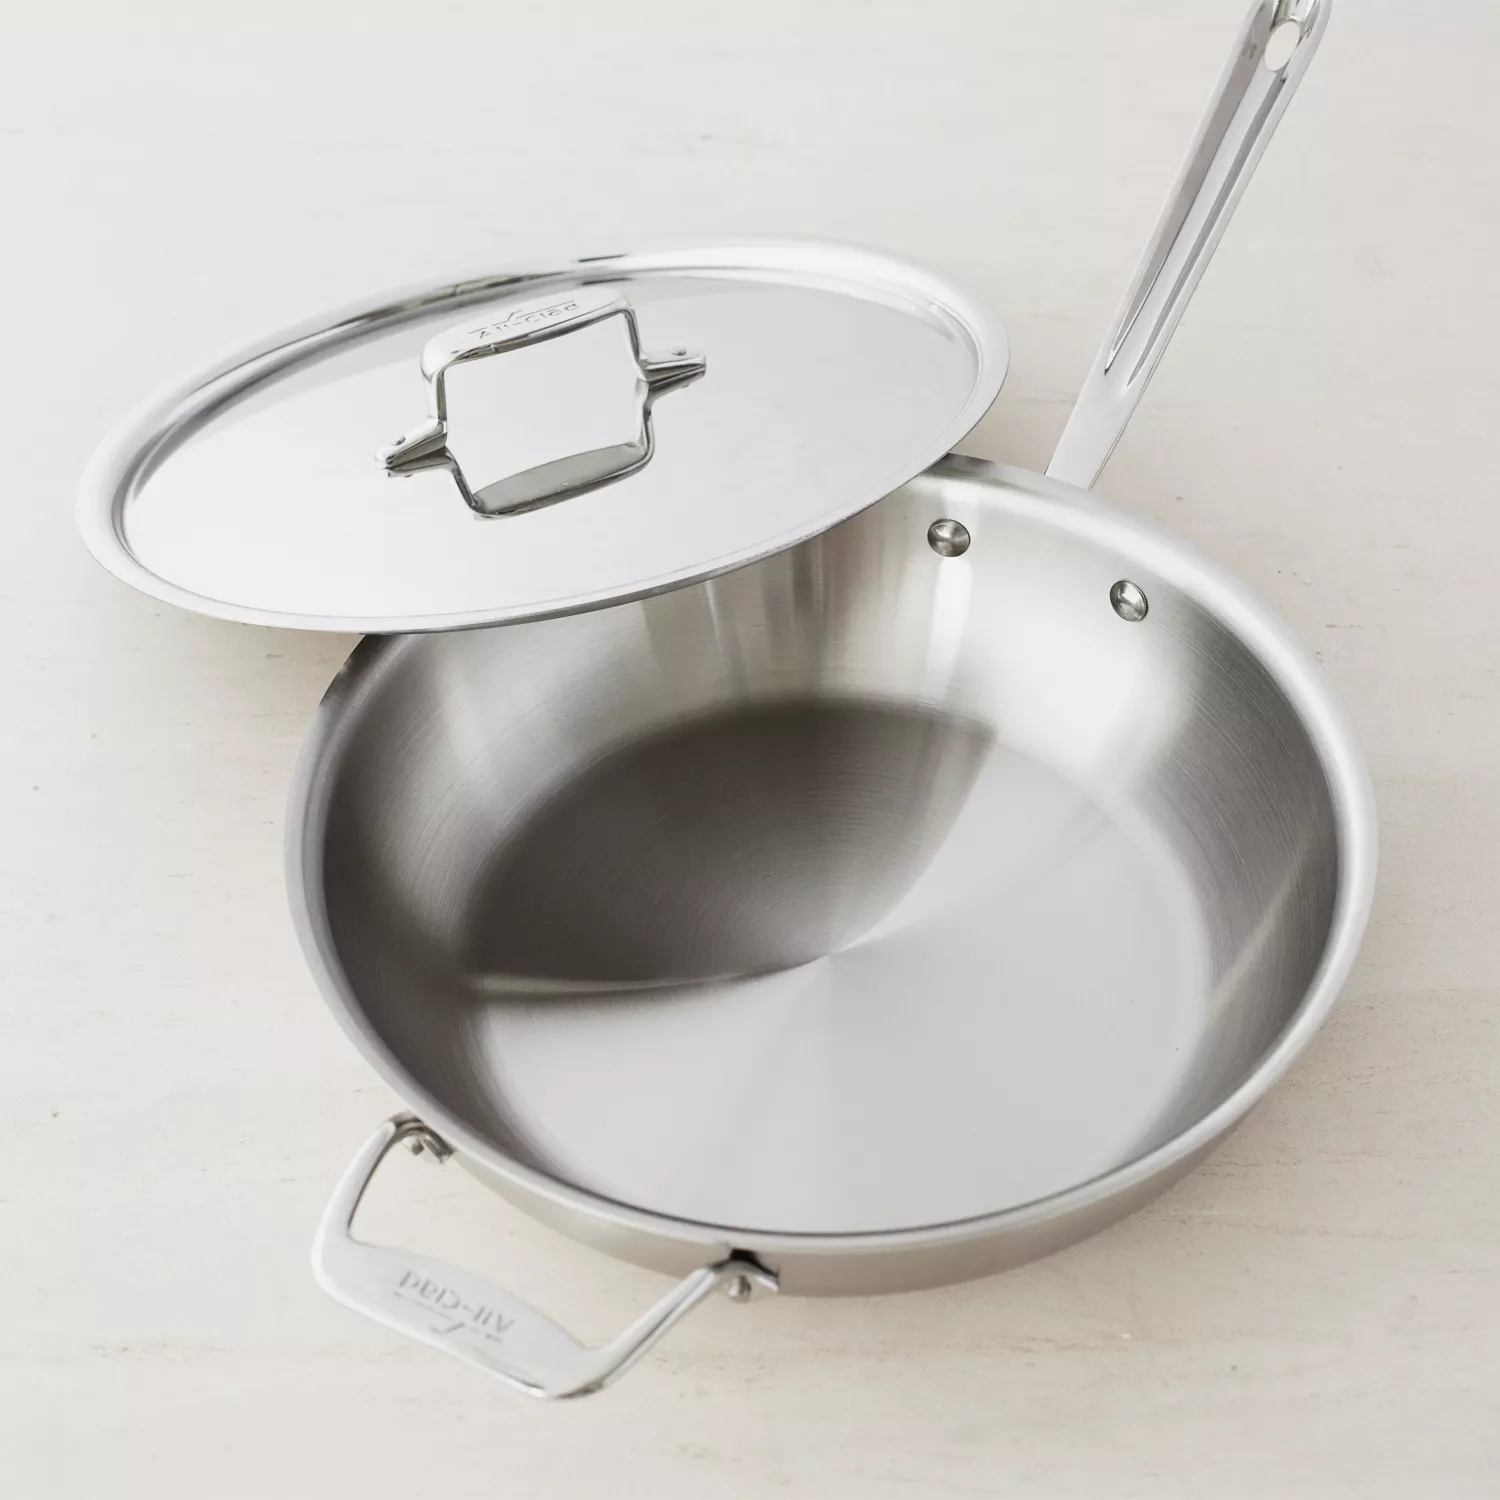 All Clad Stainless Steel 4 Quart Weeknight Pan